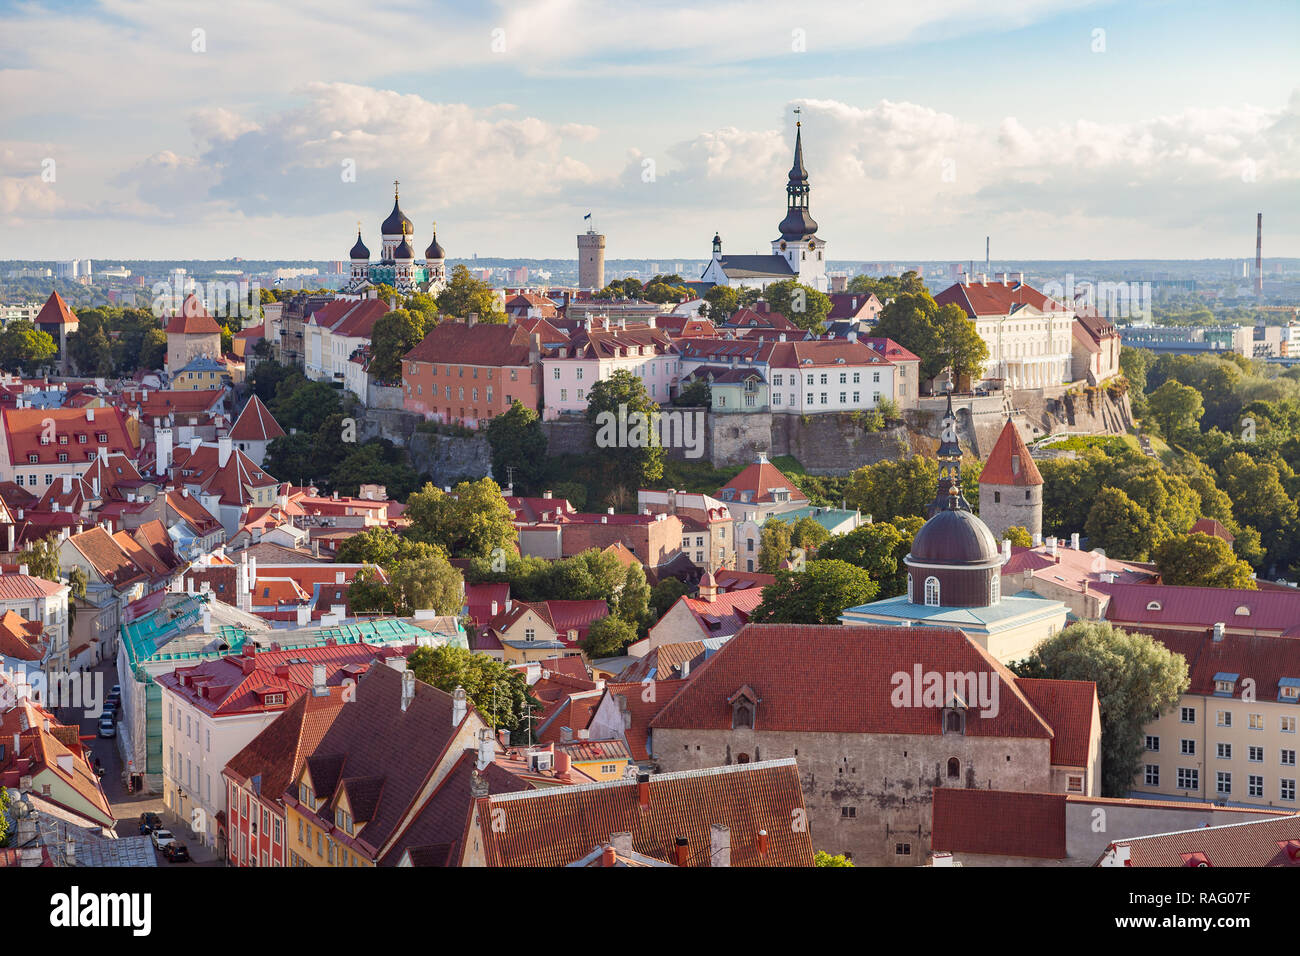 Red roofs of old town Tallinn, Estonia at sunny day Stock Photo